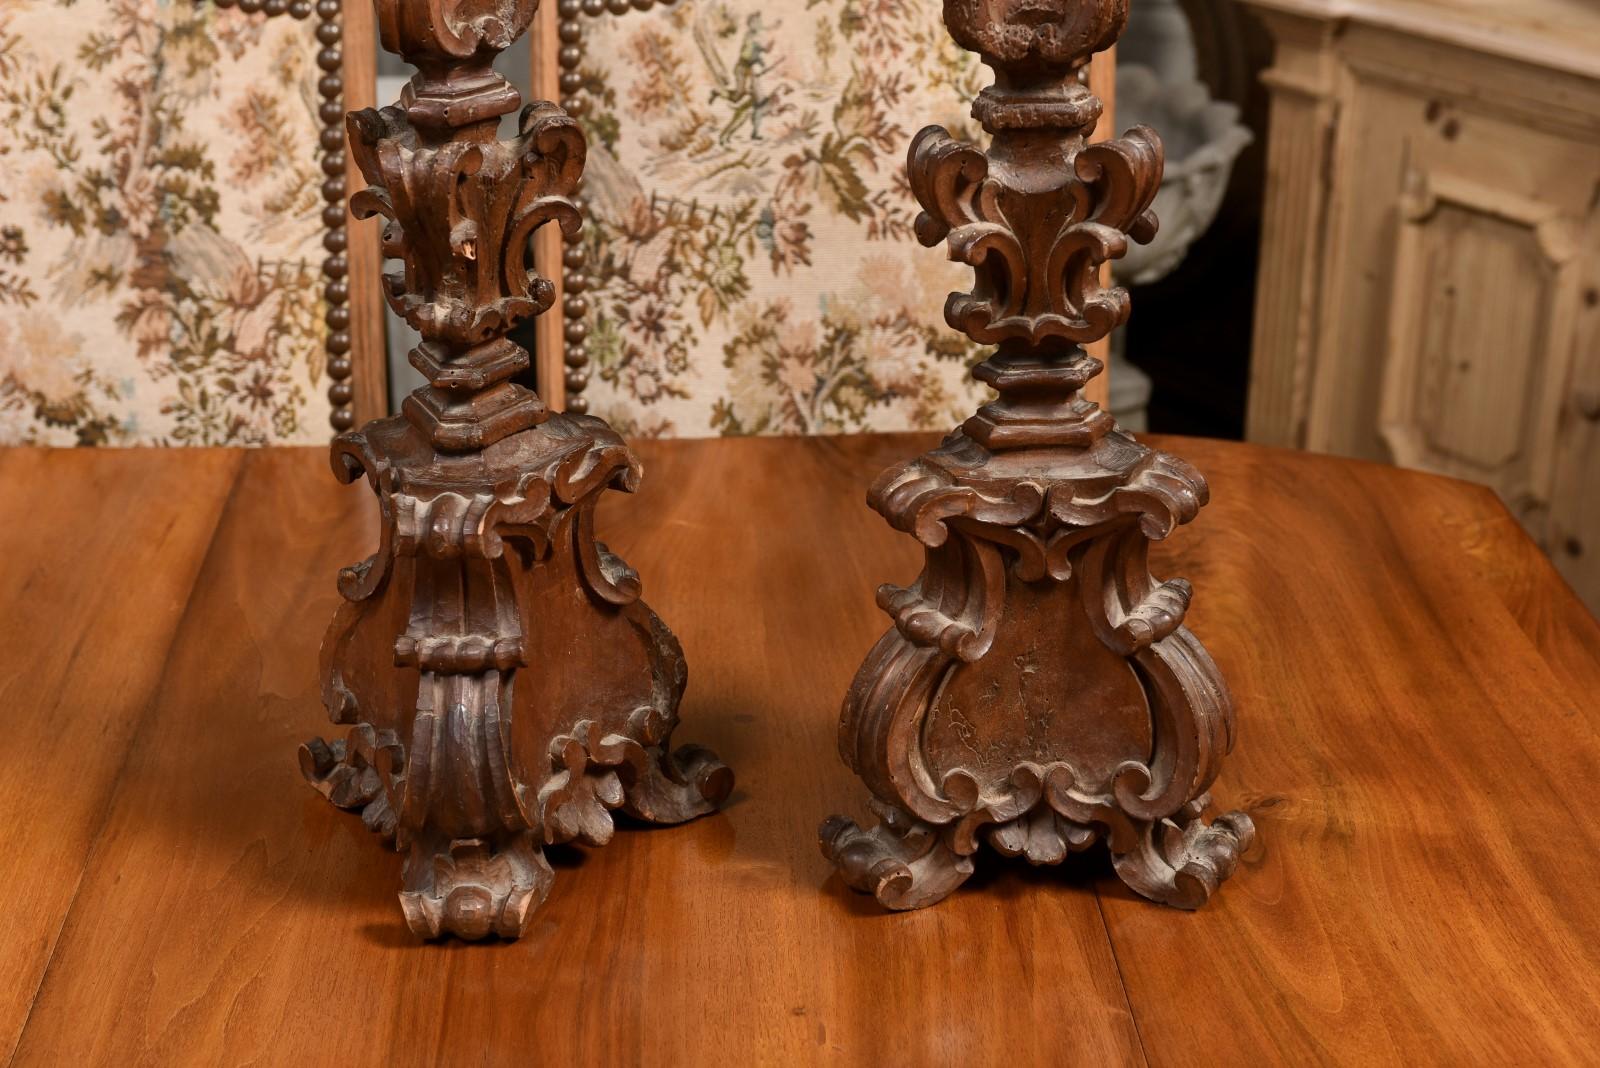 Pair of Italian 17th Century Baroque Period Altar Candlesticks with Carved Décor For Sale 1